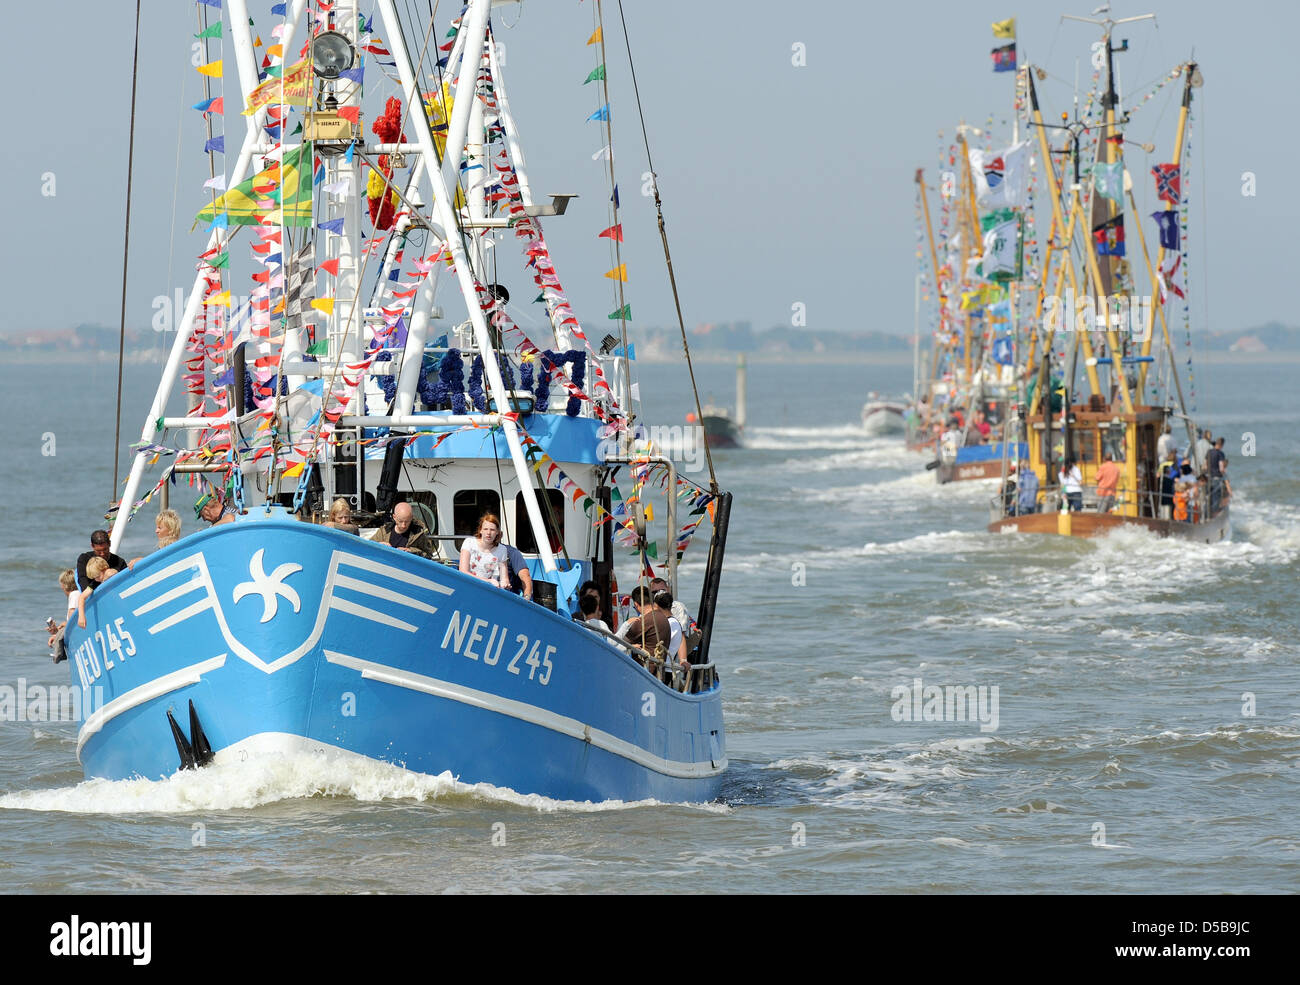 Two shrimp cutters arrive for the 44th Cutter Regatta in Neuharlingsiel, Germany, 14 August 2010. Winner of the Cutter Regatta will be the ship that impresses the spectators the most. Photo: INGO WAGNER Stock Photo